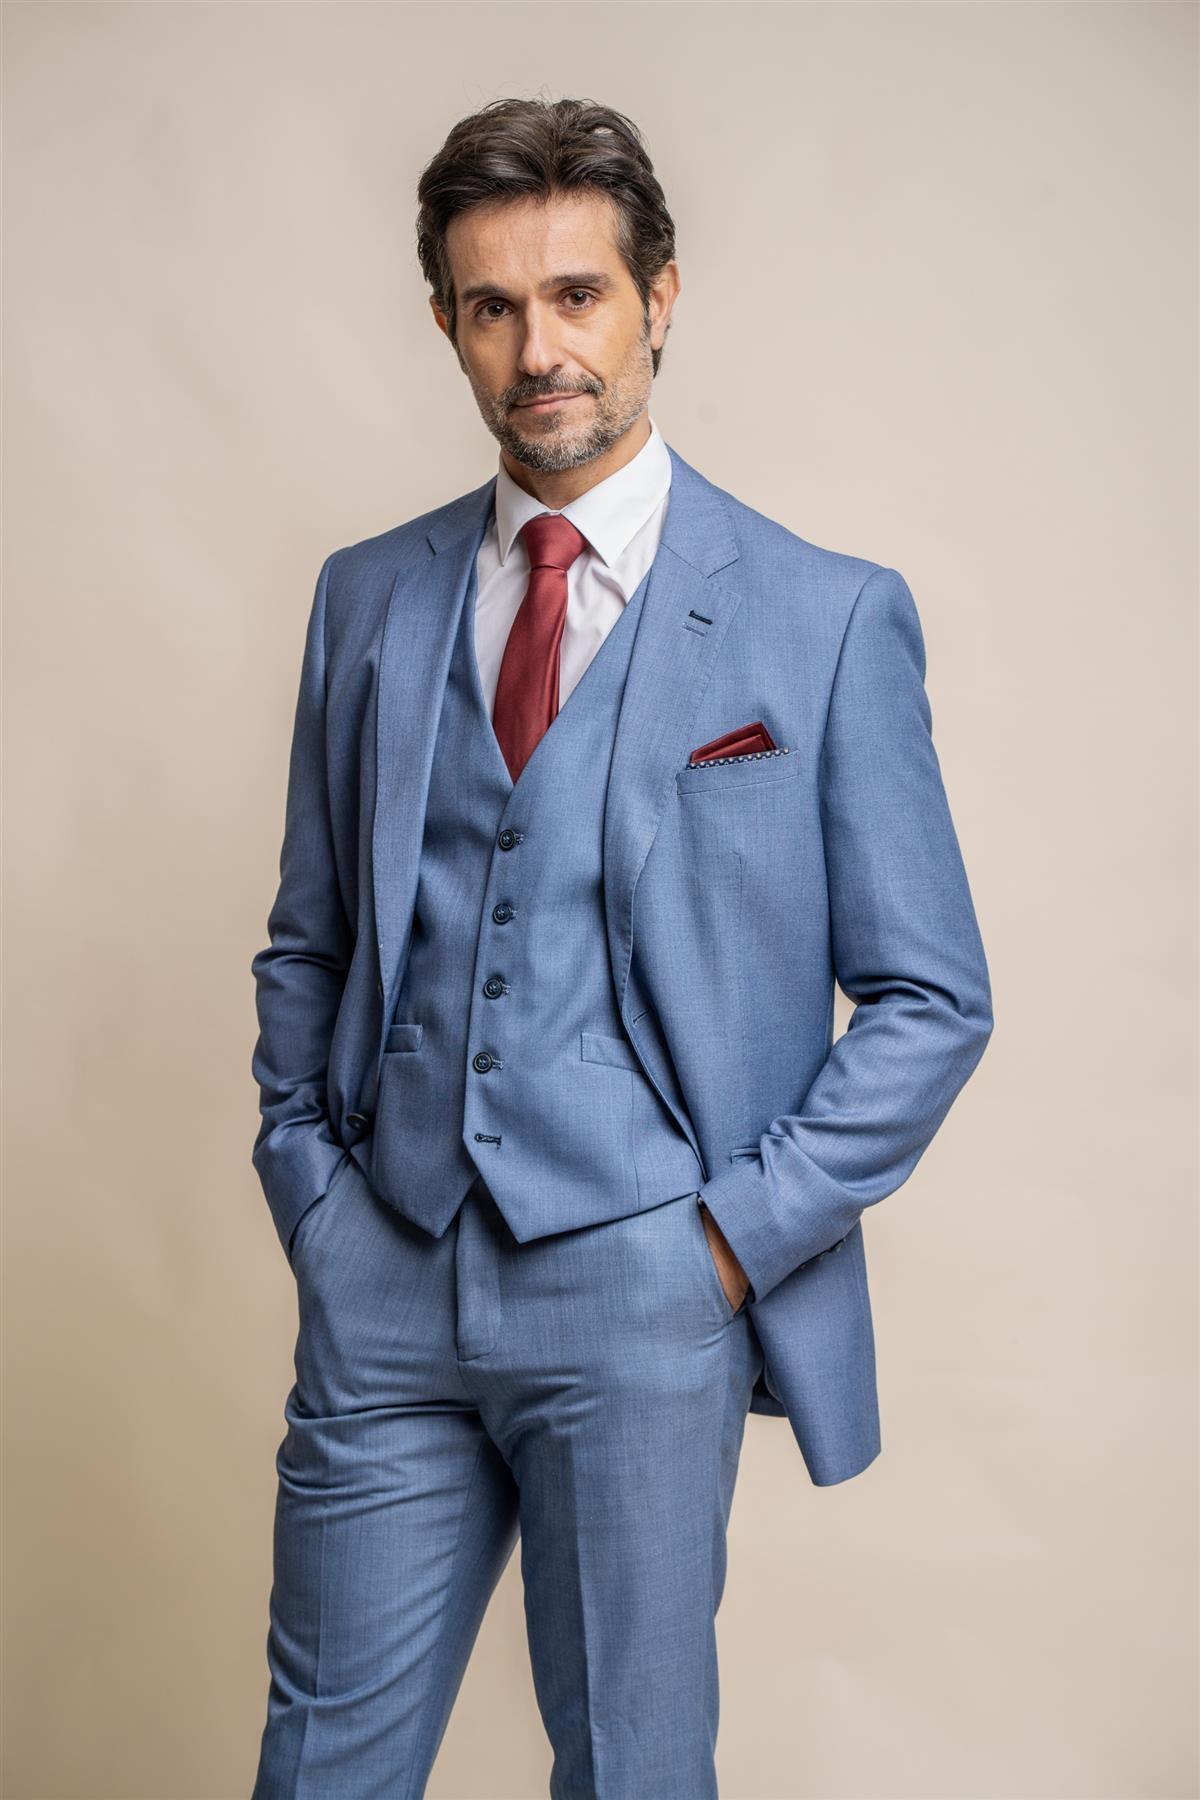 Bluejay Three Piece Suit Front